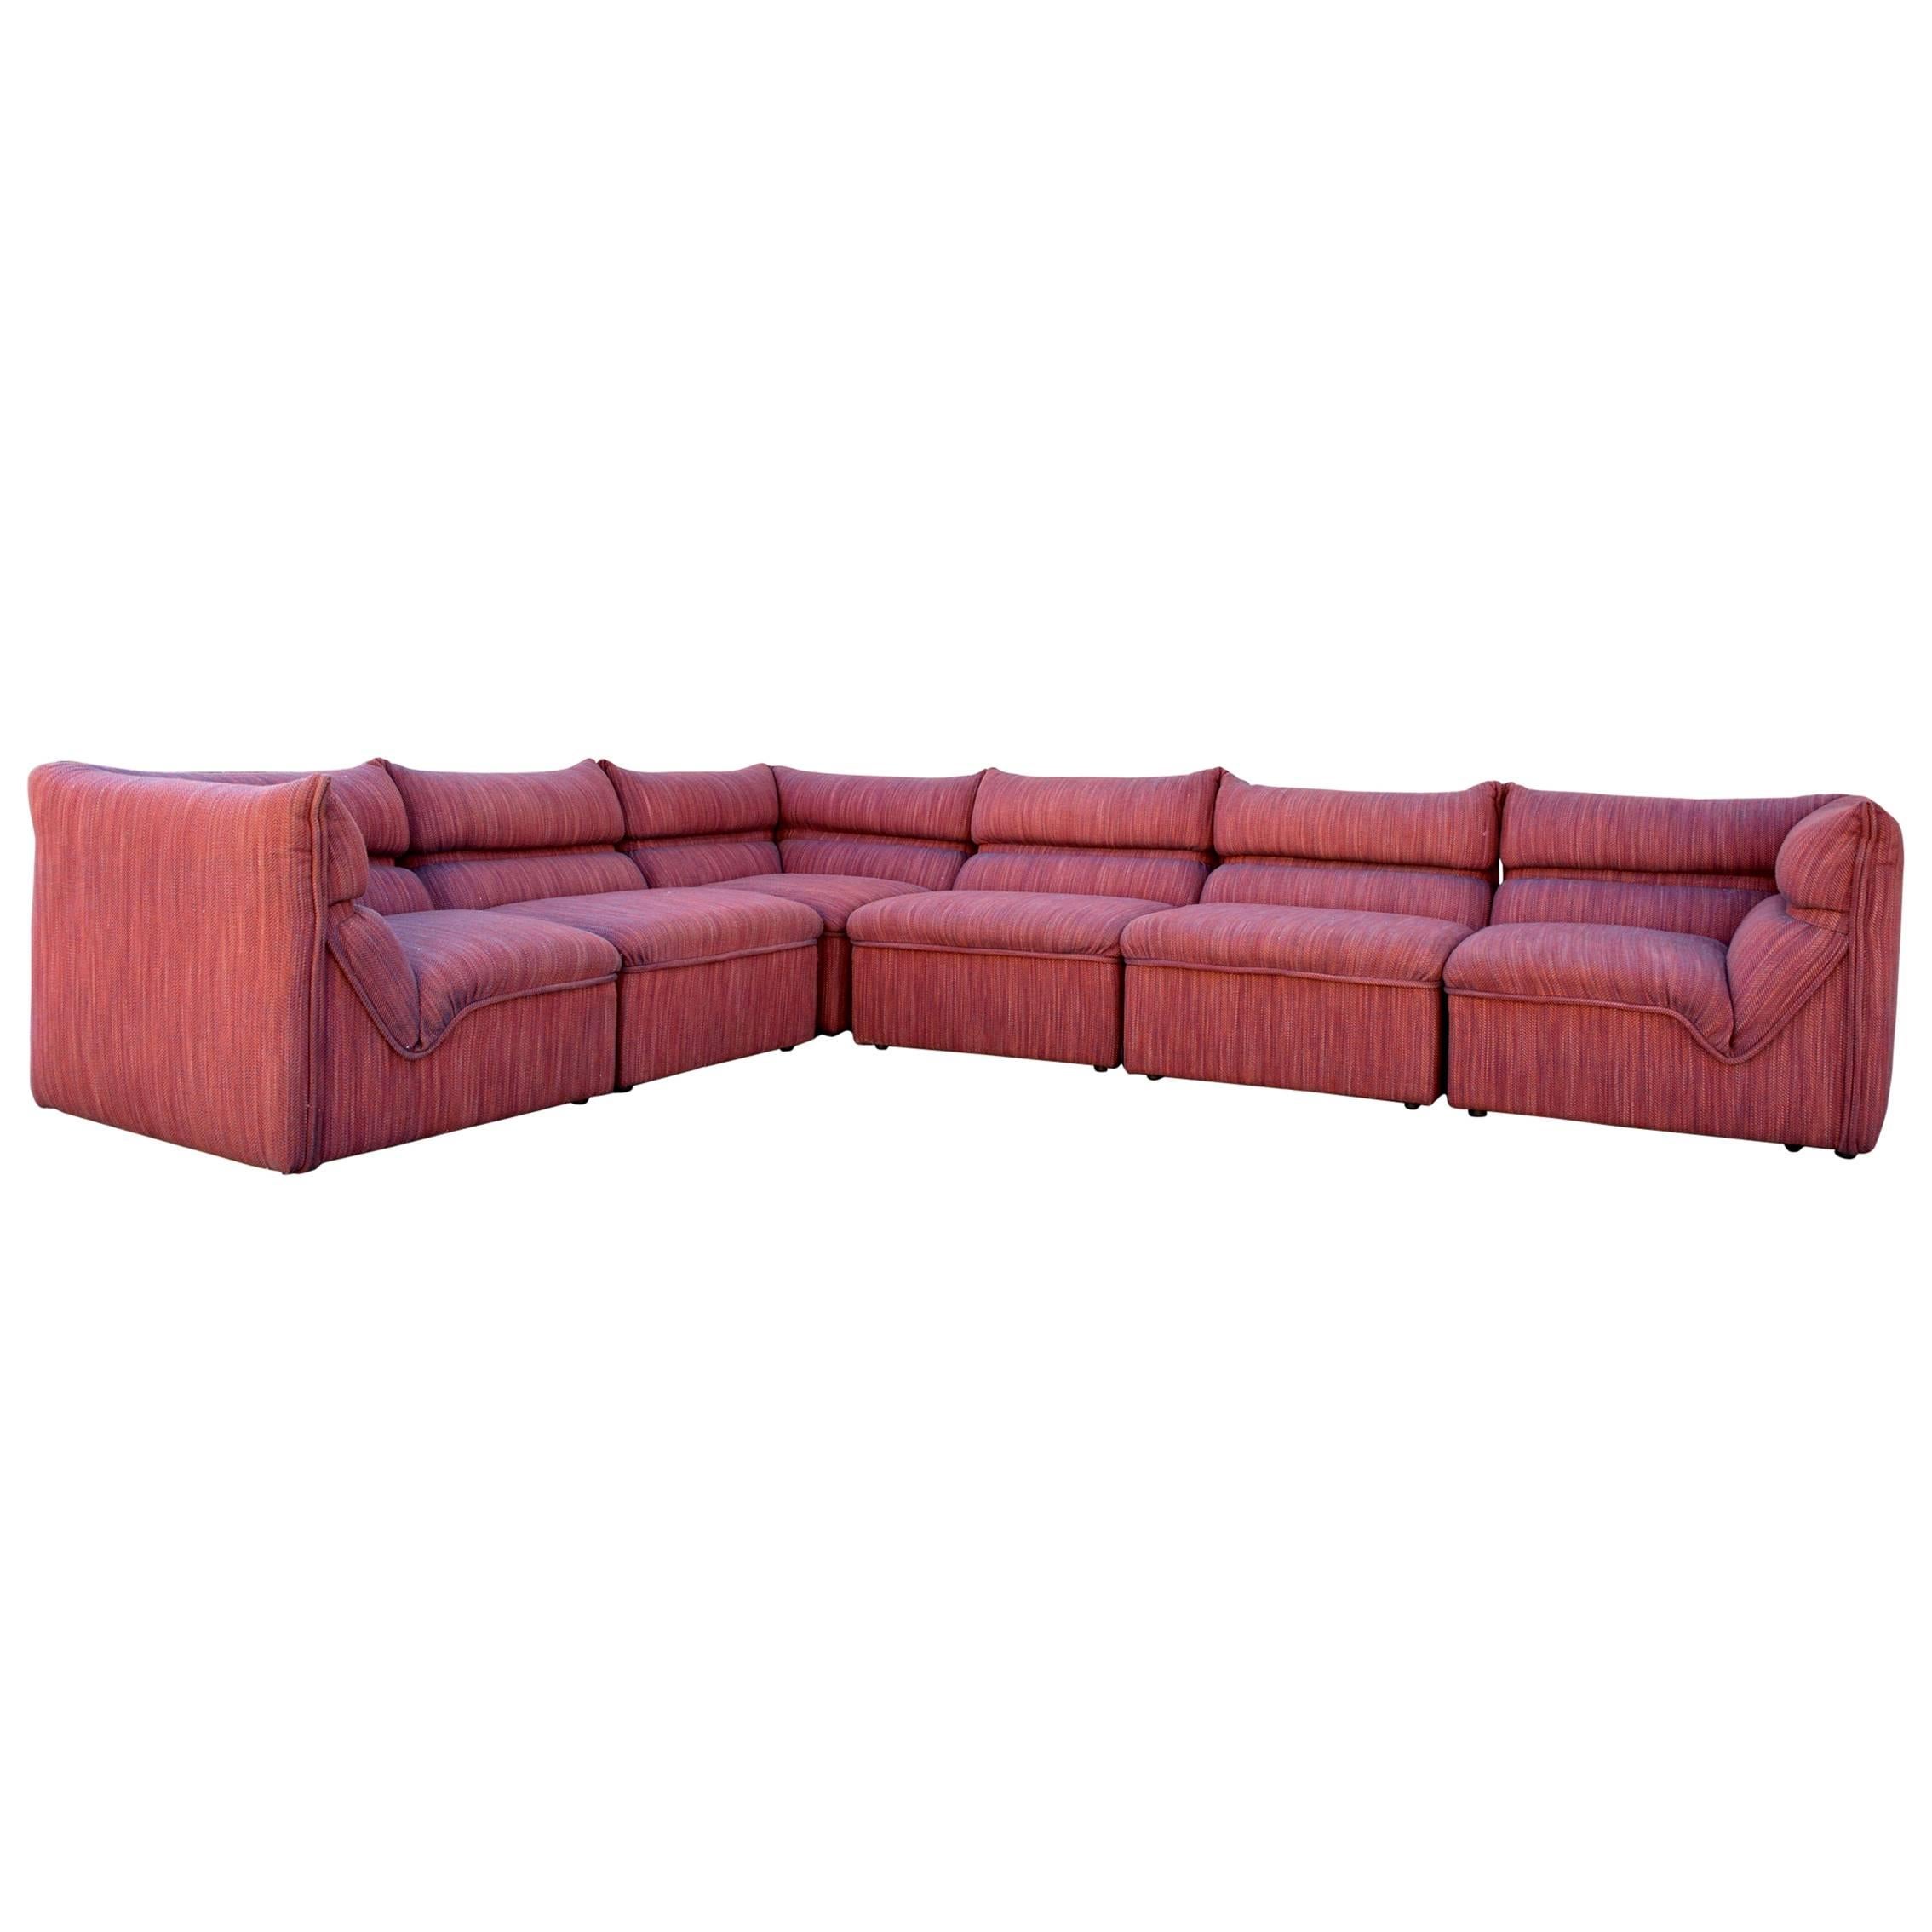 Montecarlo Sofa by Guido Faleschini for the Pace Collection